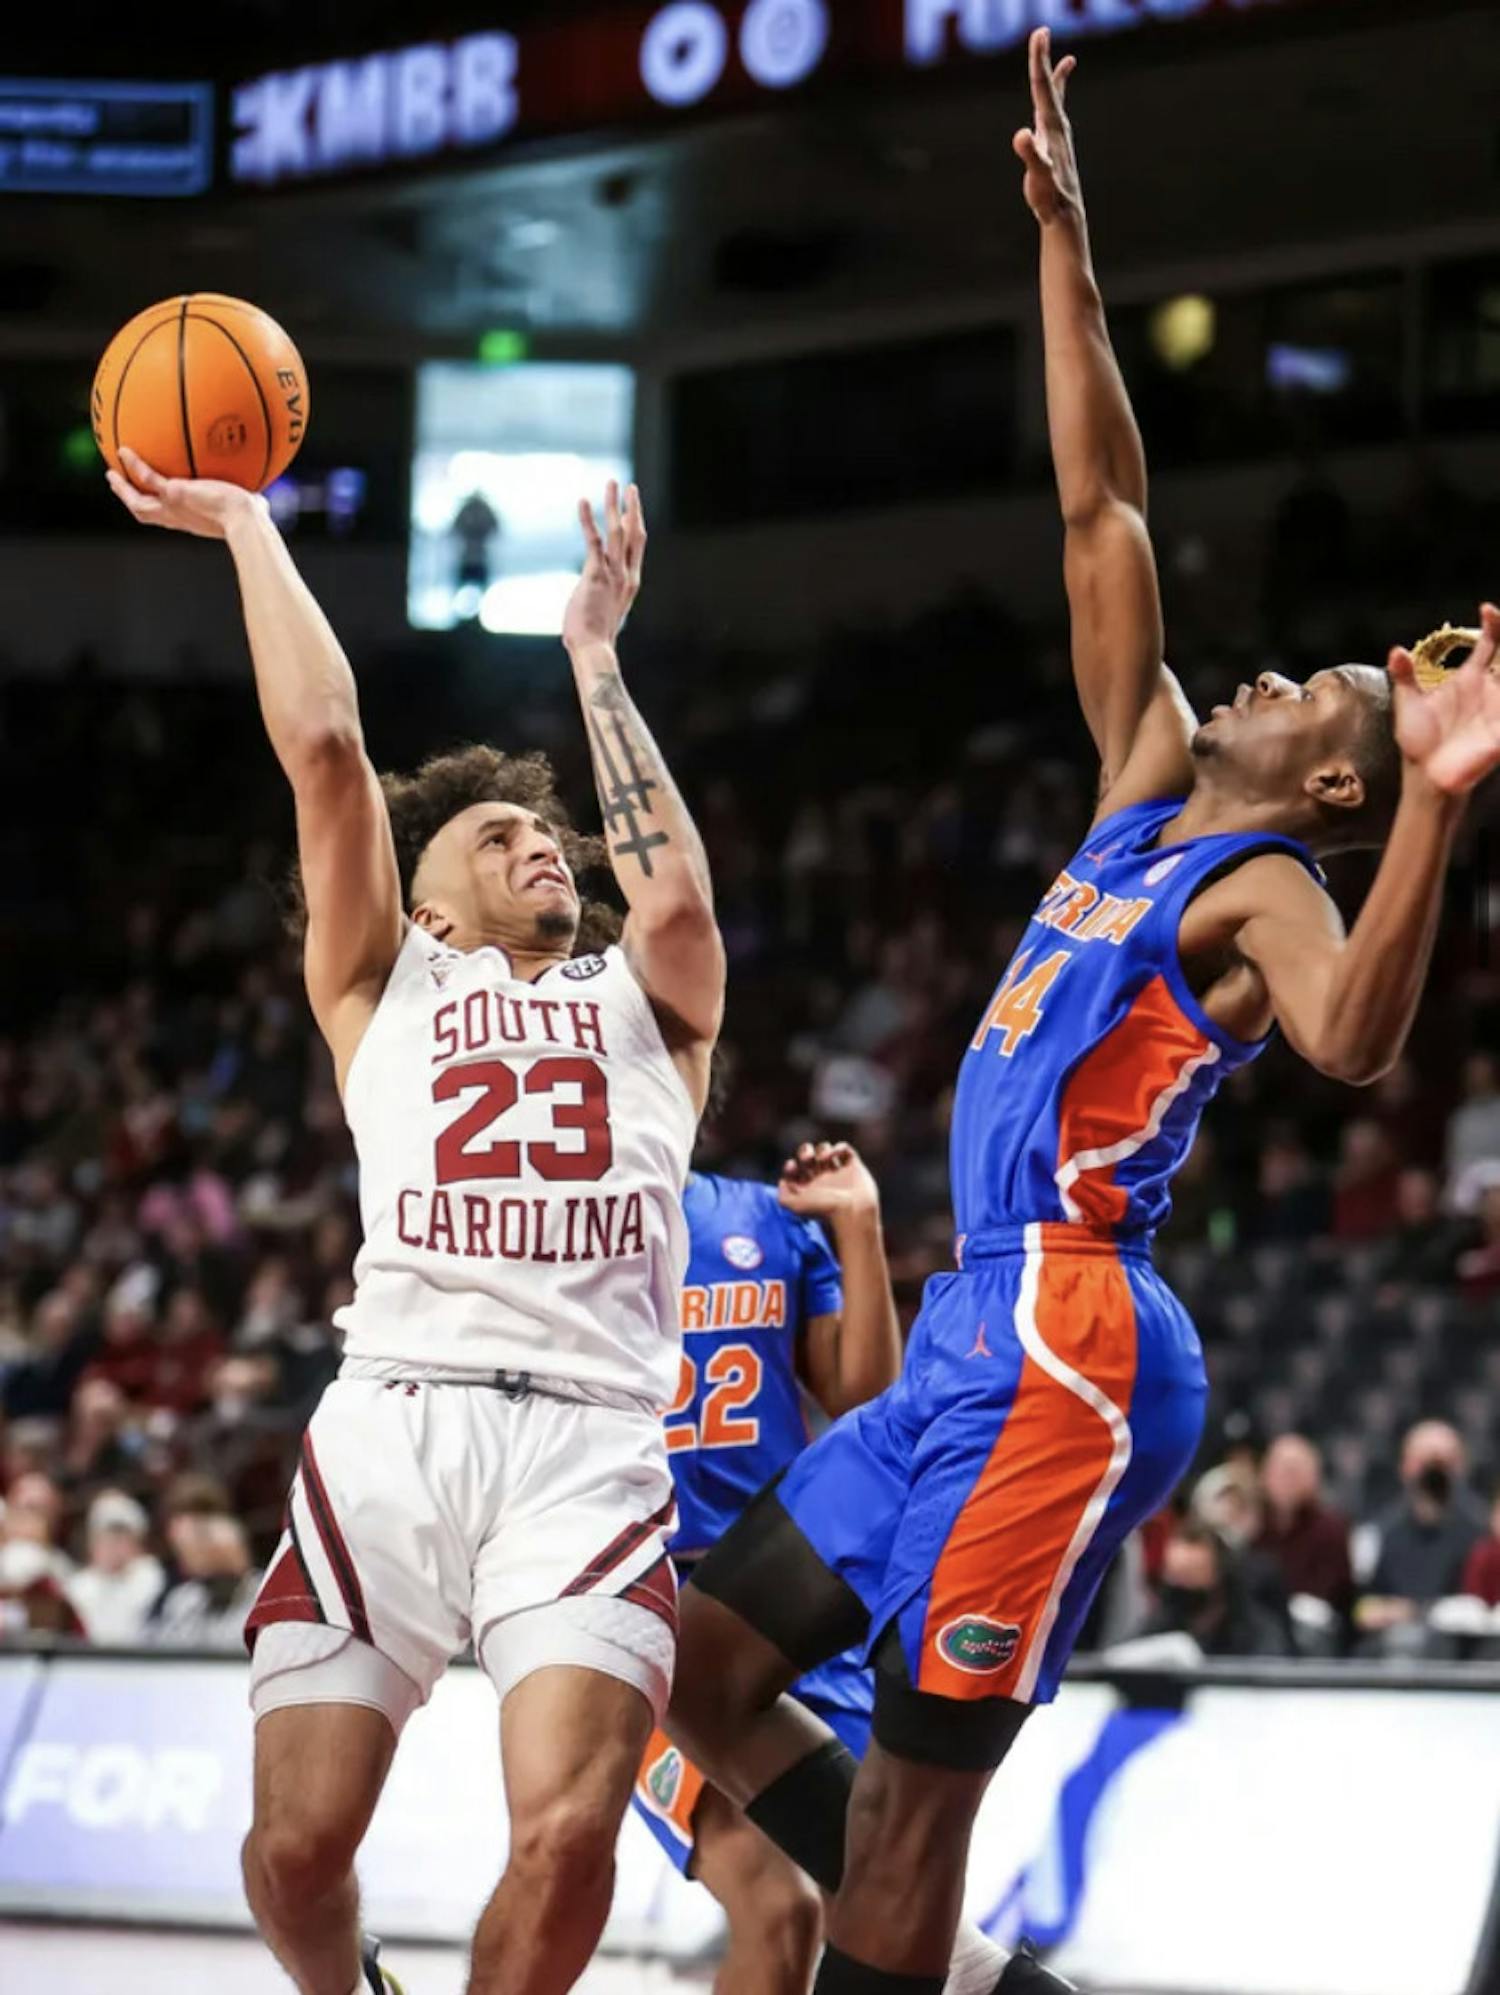 Kowacie Reeves defends South Carolina guard Devin Carter in the first half of Florida’s Jan. 15 game against South Carolina